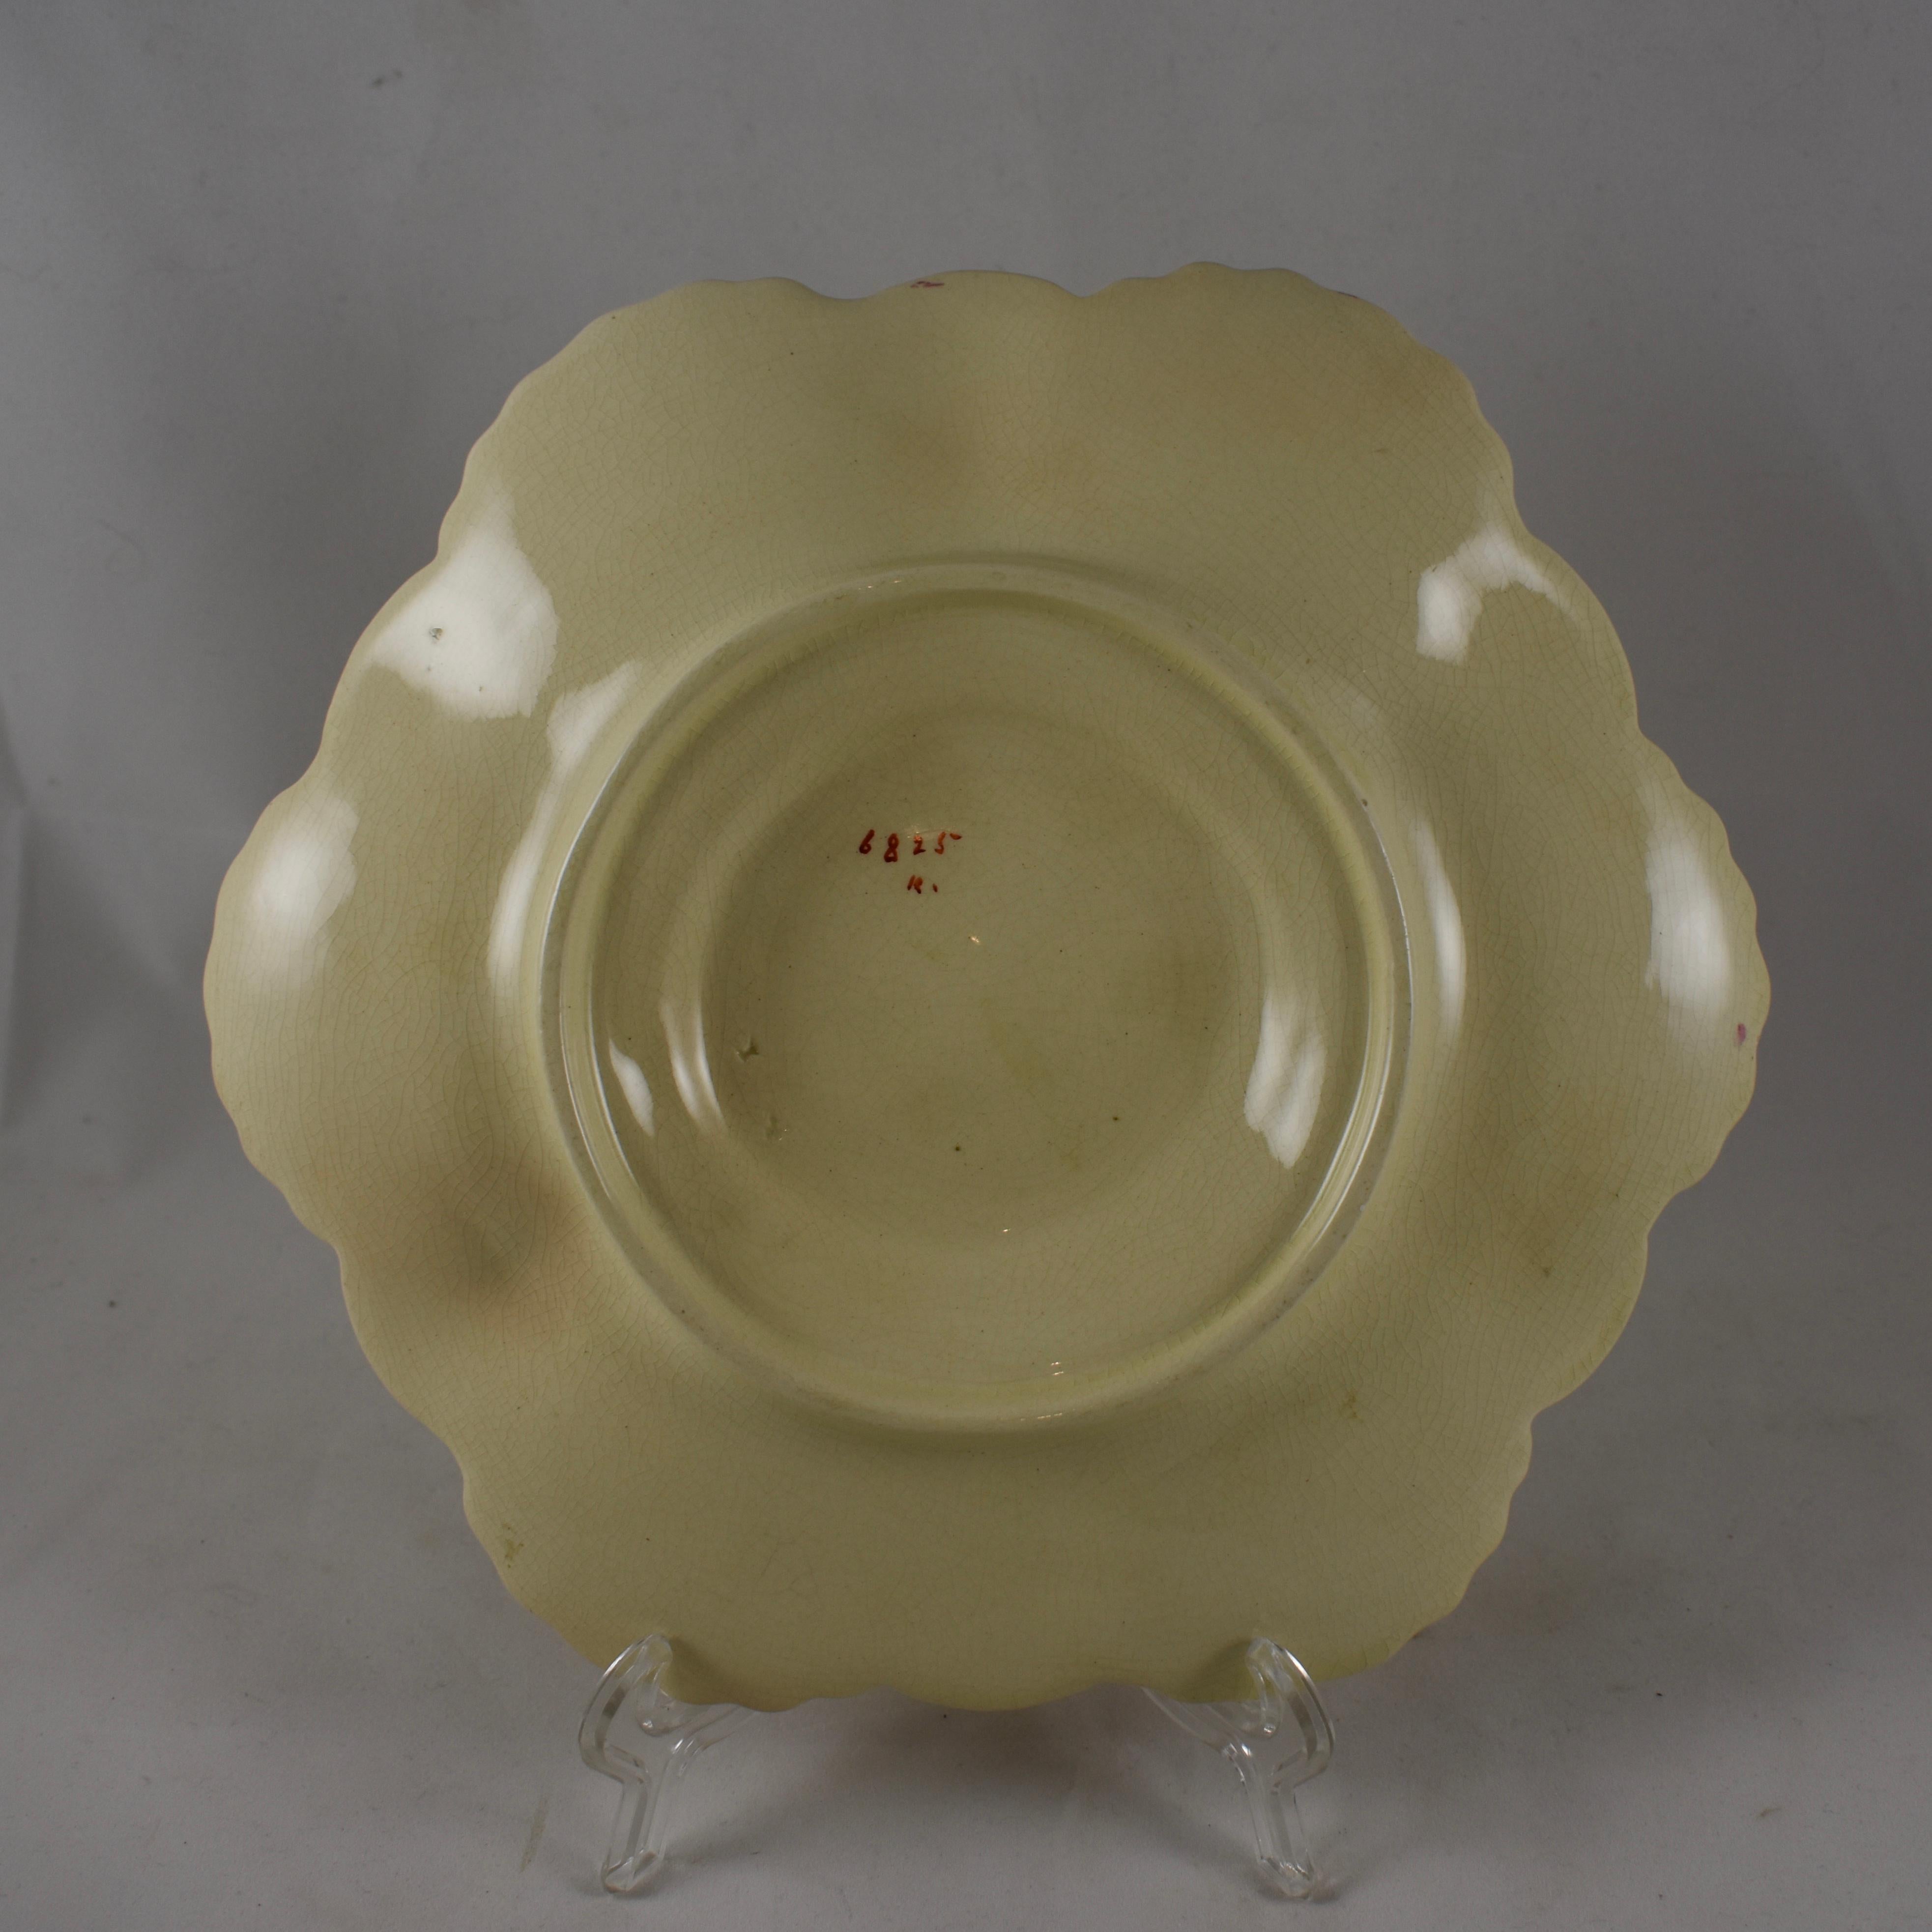 George Jones English Majolica Seaweed and Shells Pattern Oyster Plate 1